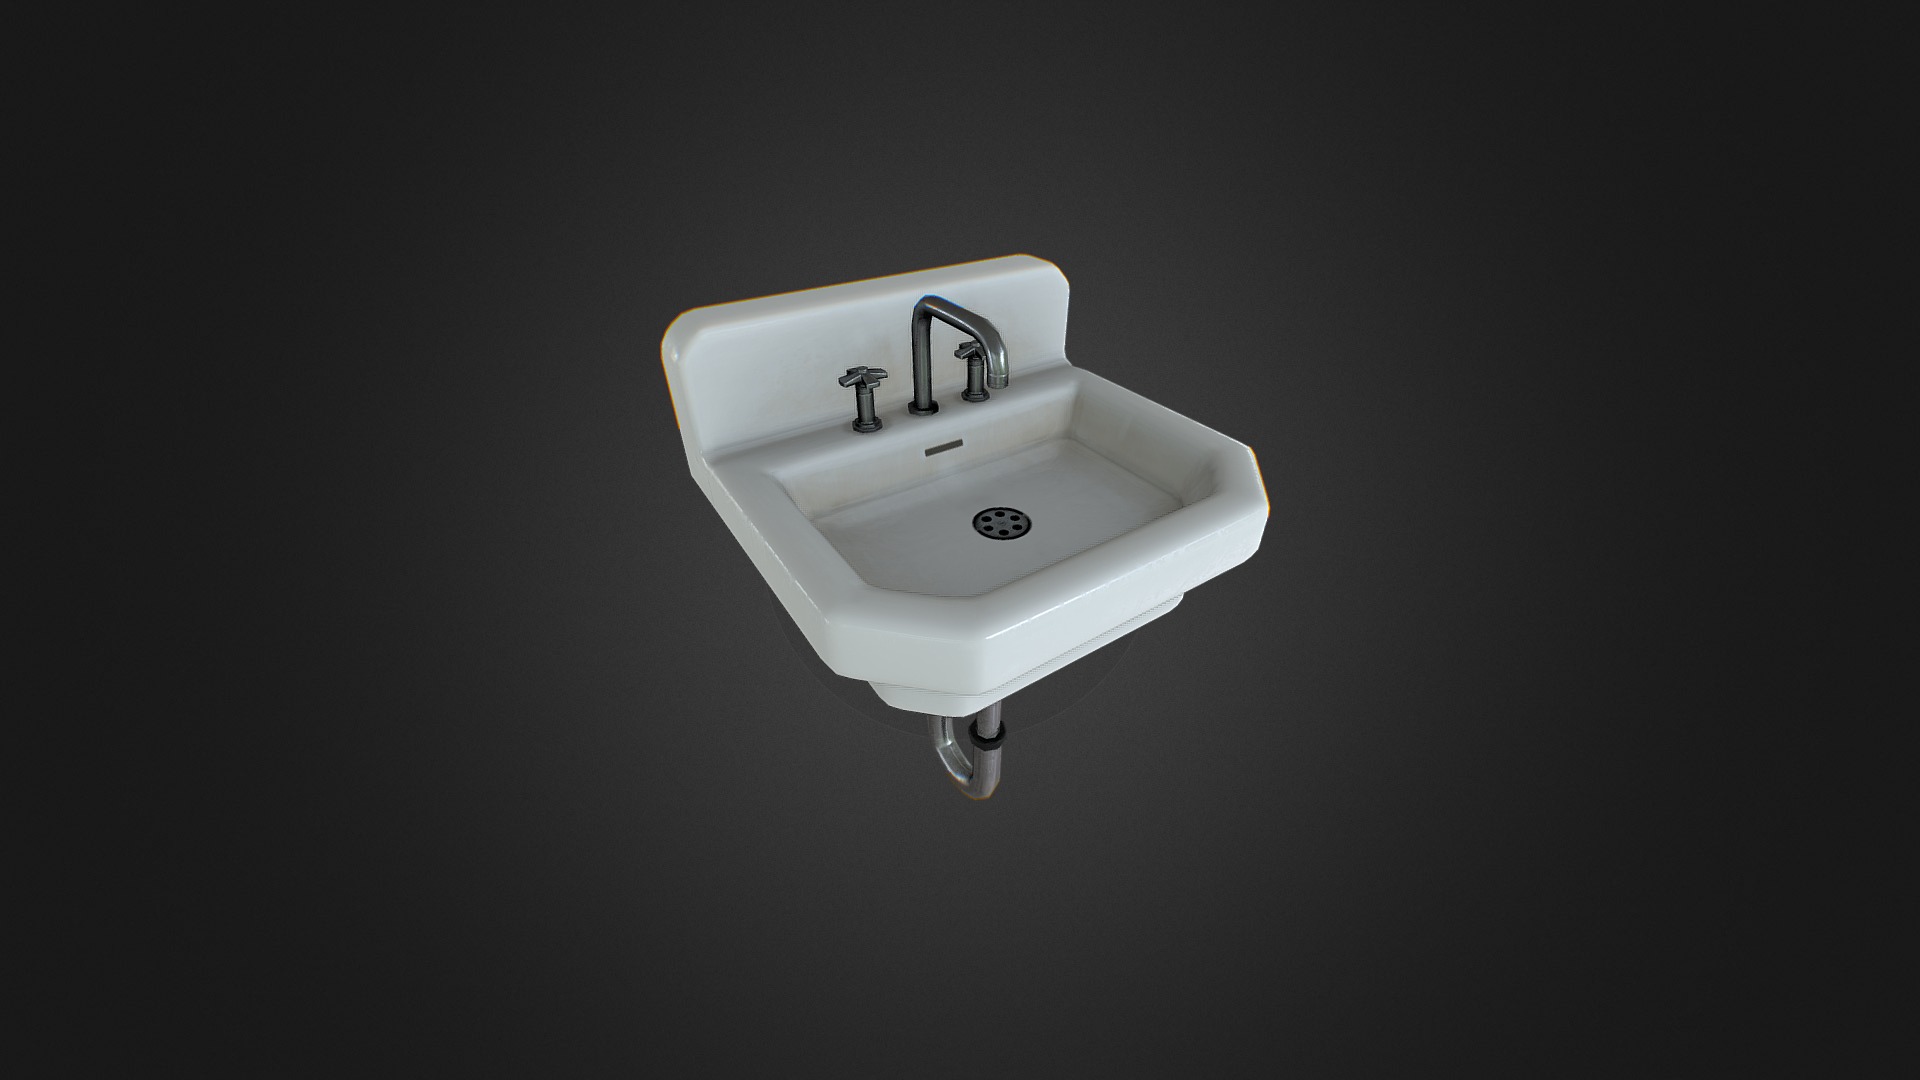 3D model Sink clean pbr - This is a 3D model of the Sink clean pbr. The 3D model is about a white light fixture.